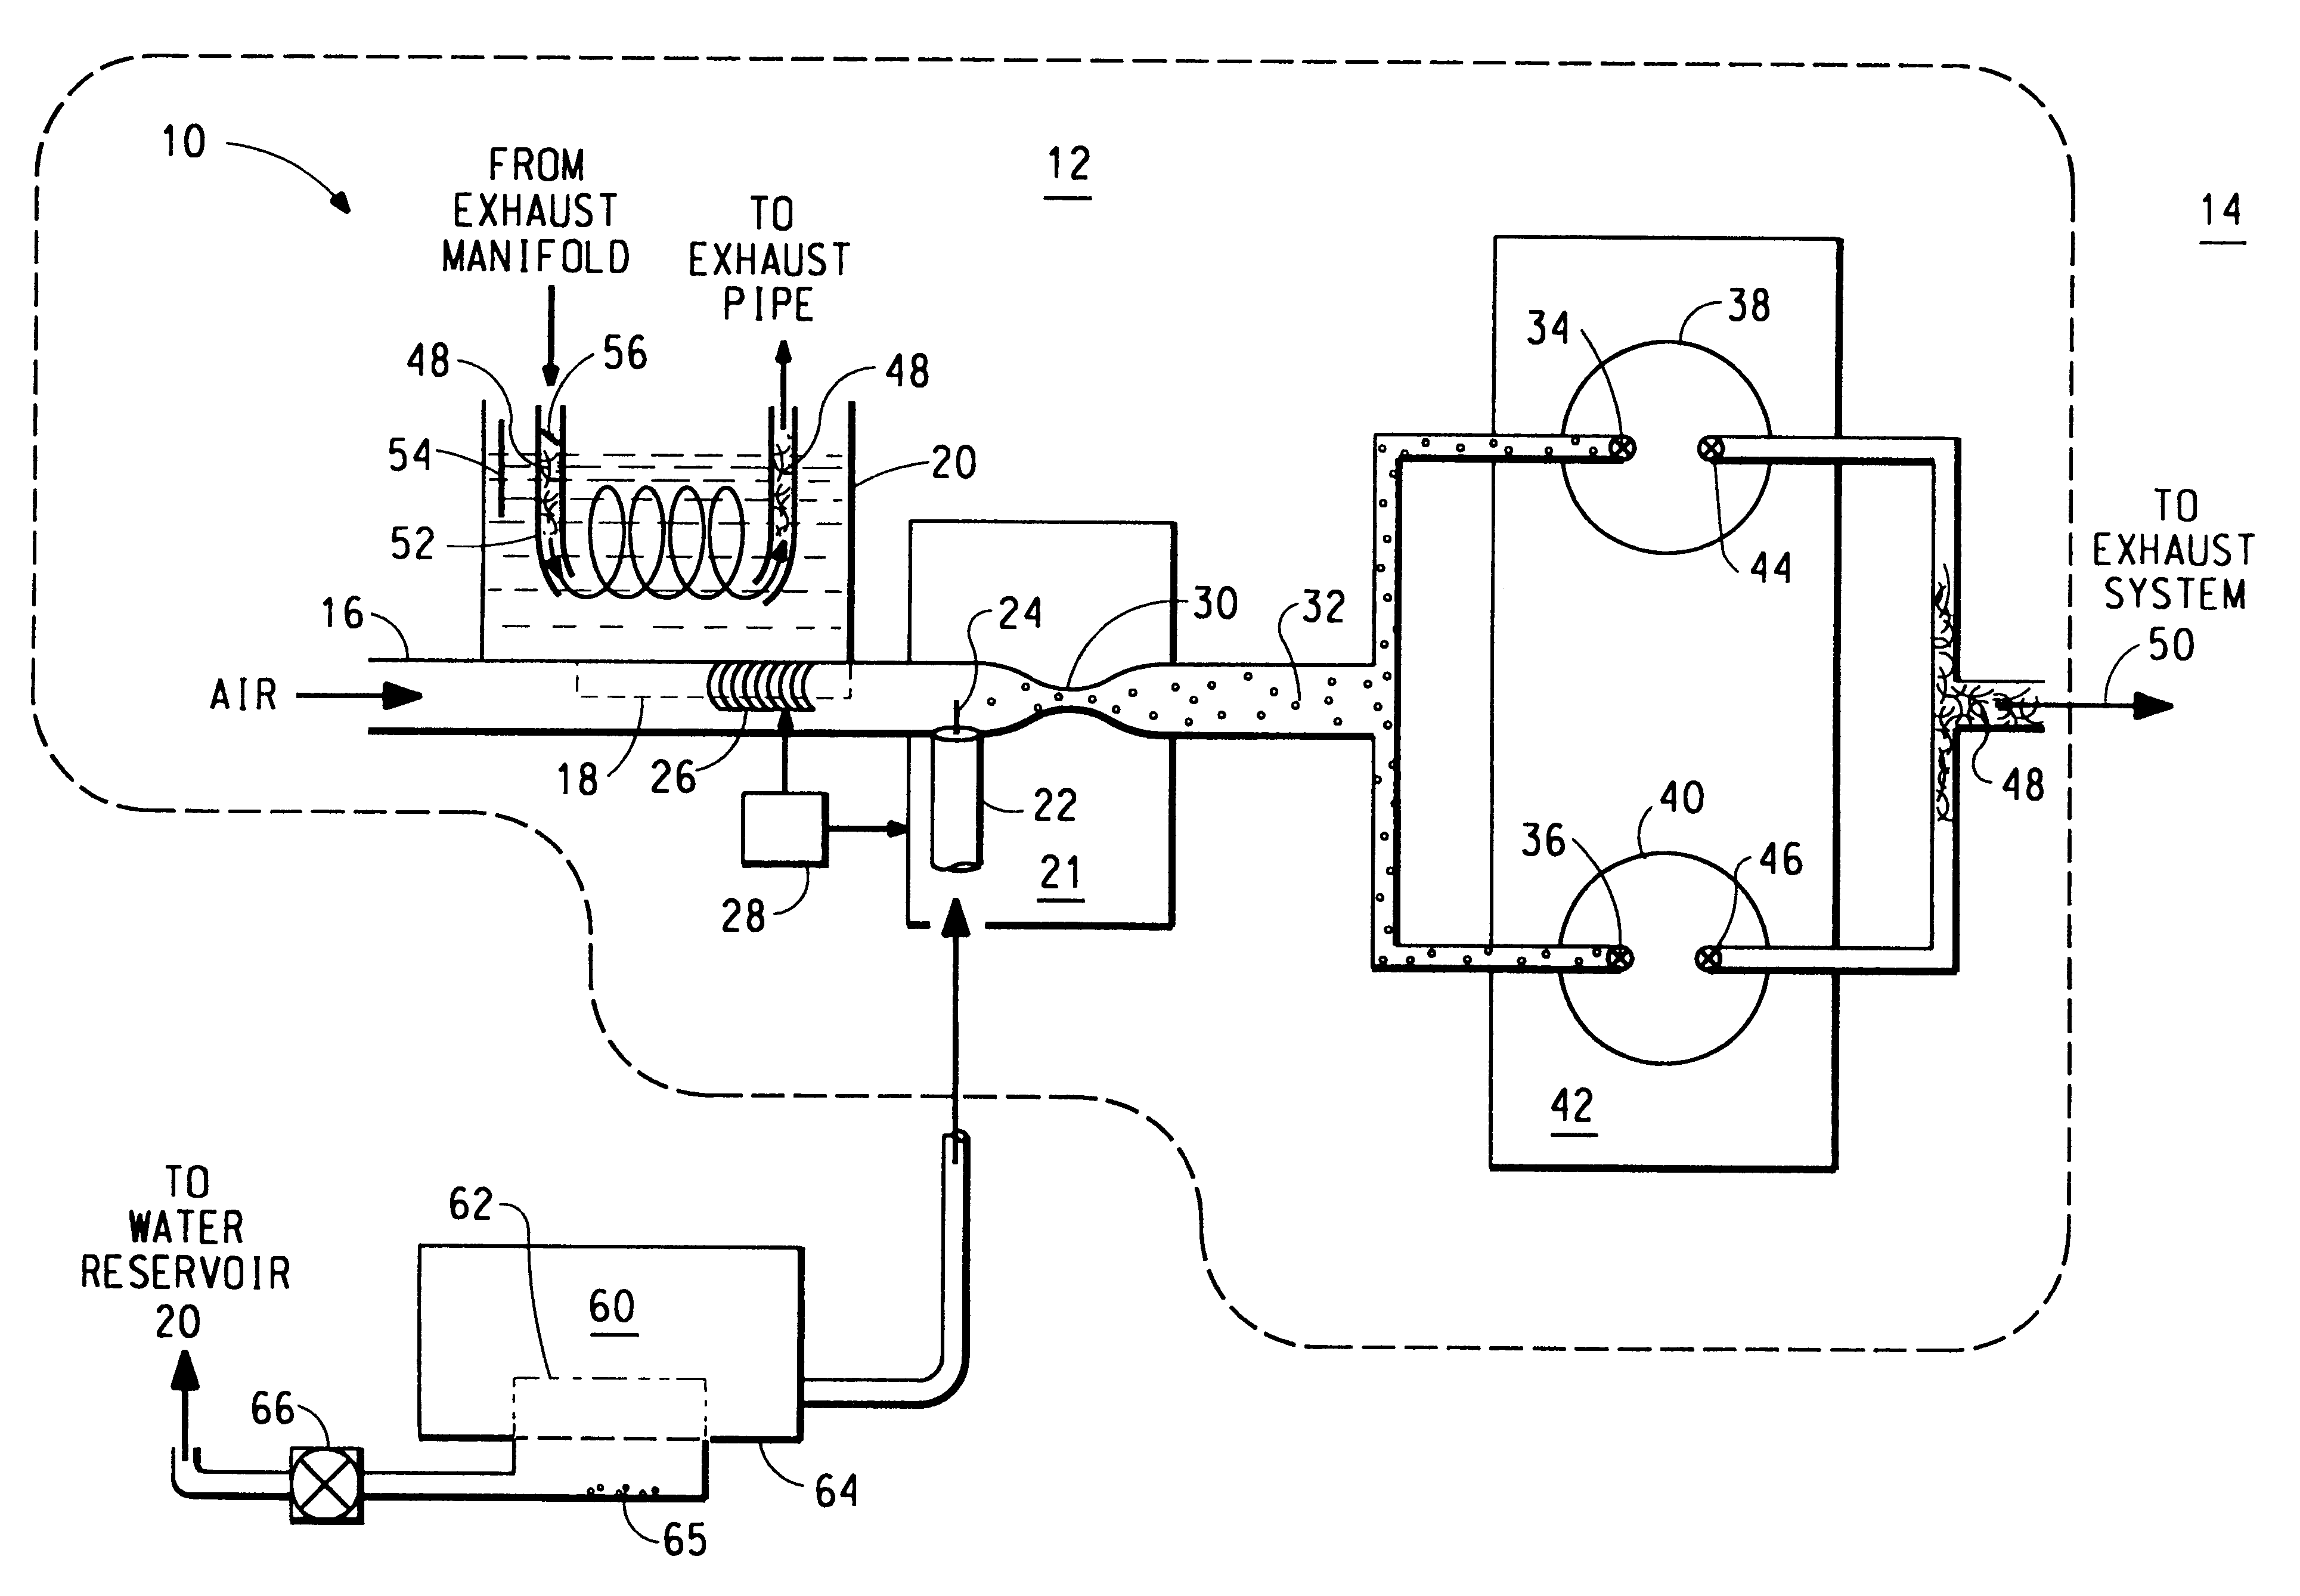 Humidifying gas induction or supply system